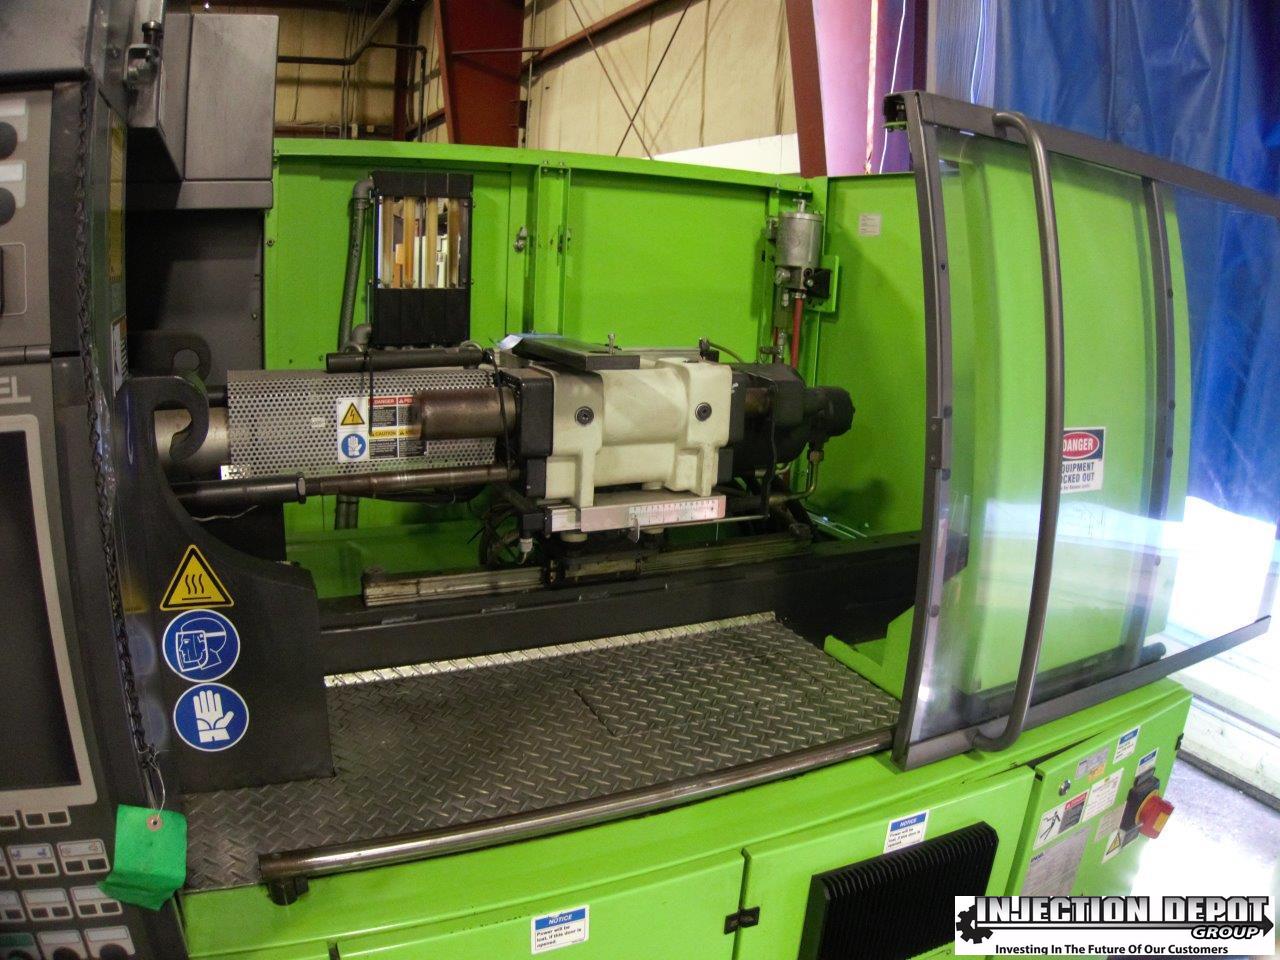 2008 ENGEL Victory 200/120 Tech US Horizontal Injection Moulding Machines | INJECTION DEPOT GROUP